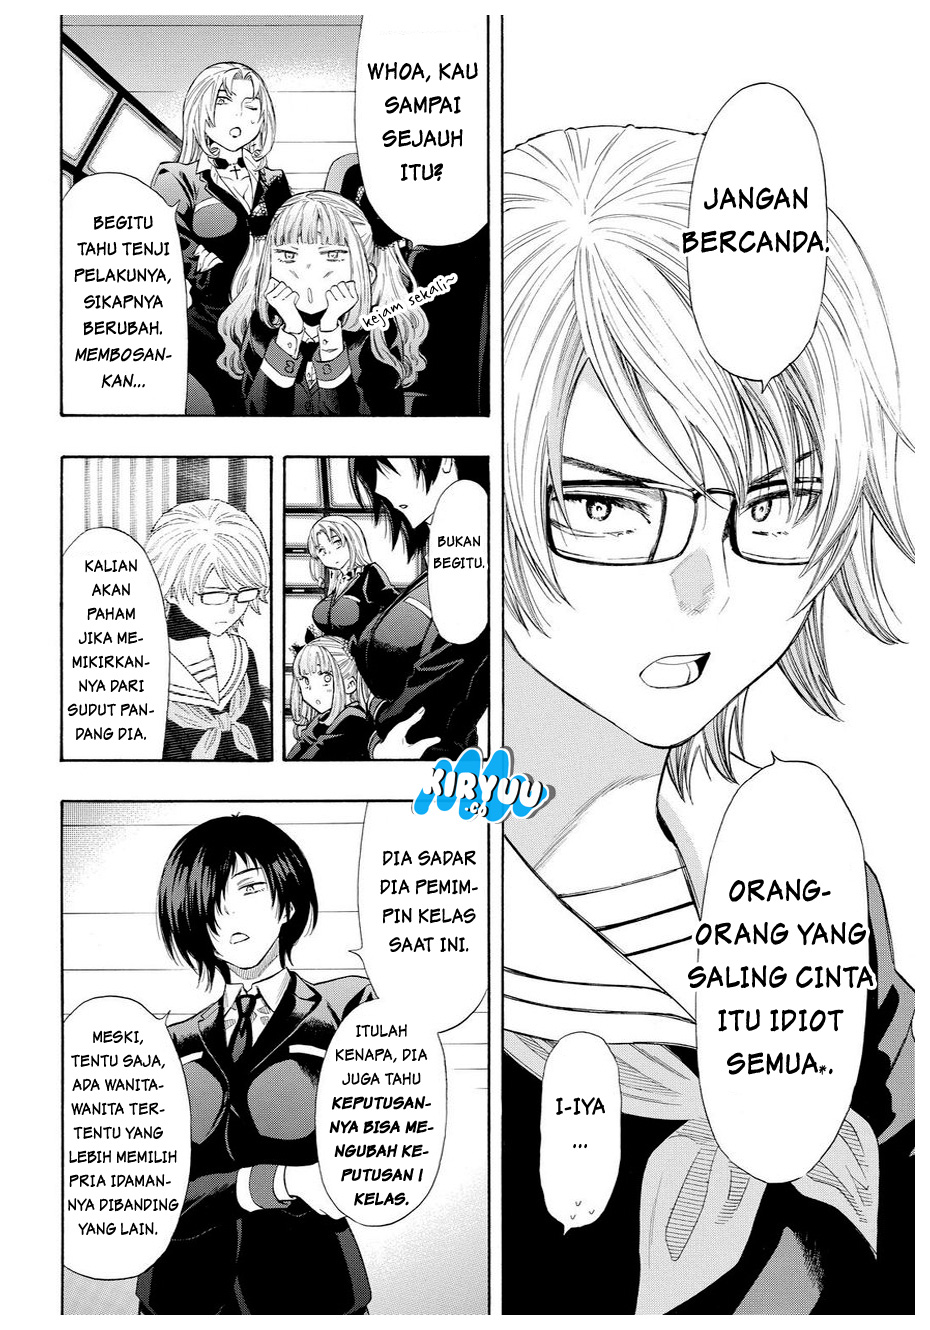 Tomodachi Game Chapter 32